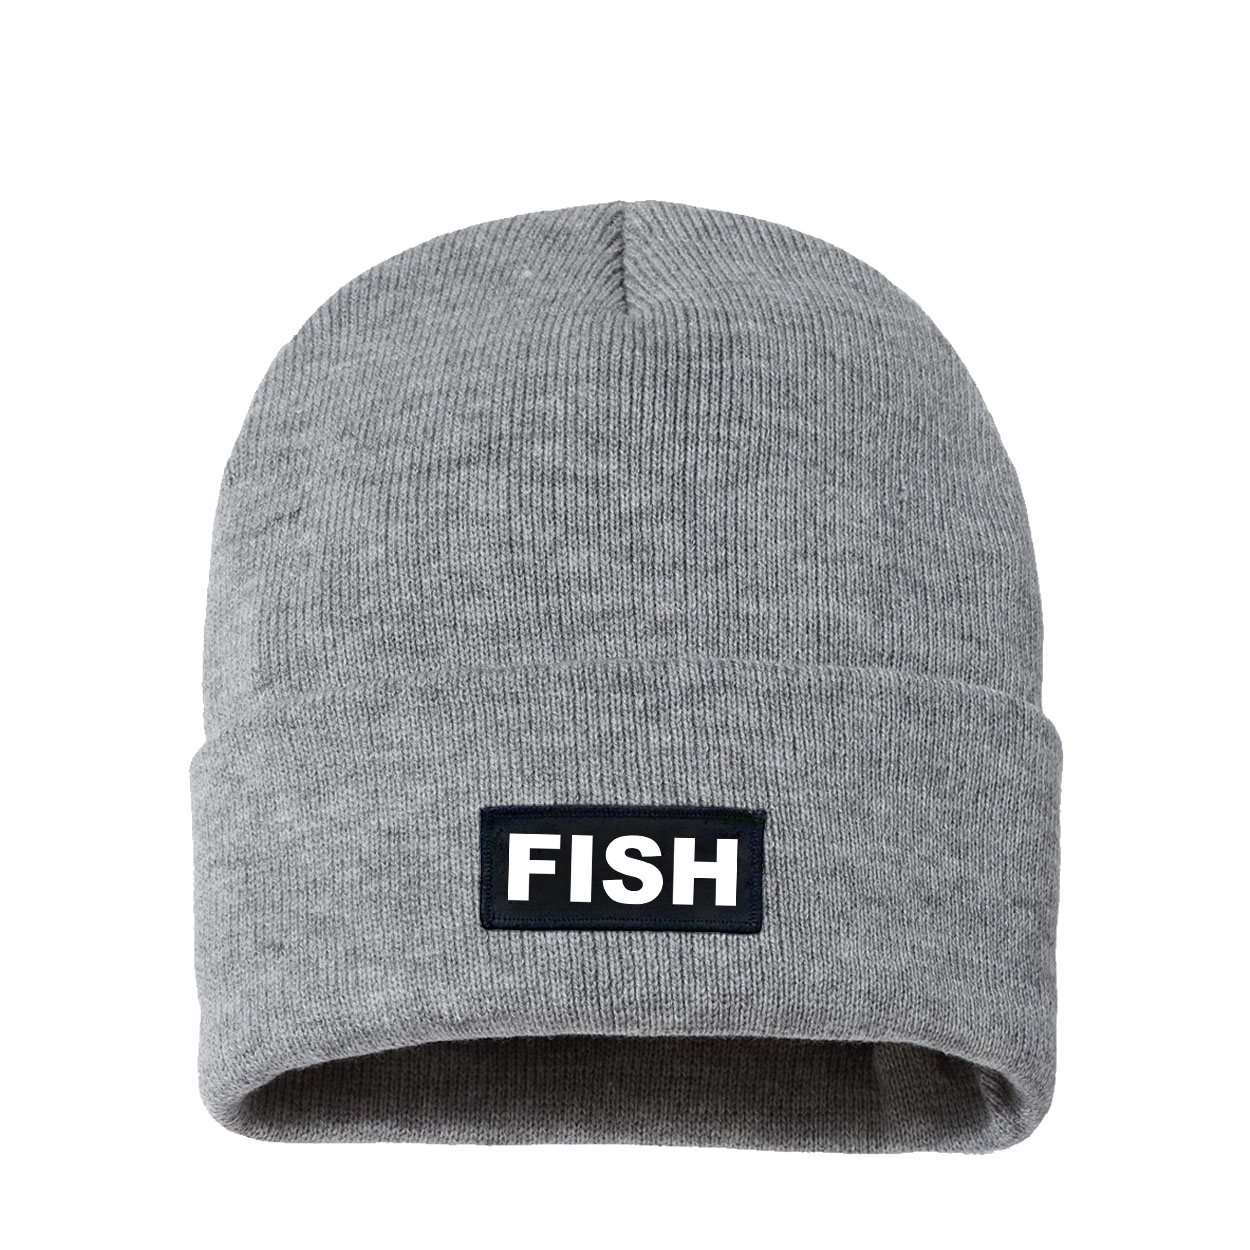 Fish Brand Logo Night Out Woven Patch Sherpa Lined Cuffed Beanie Heather Gray (White Logo)